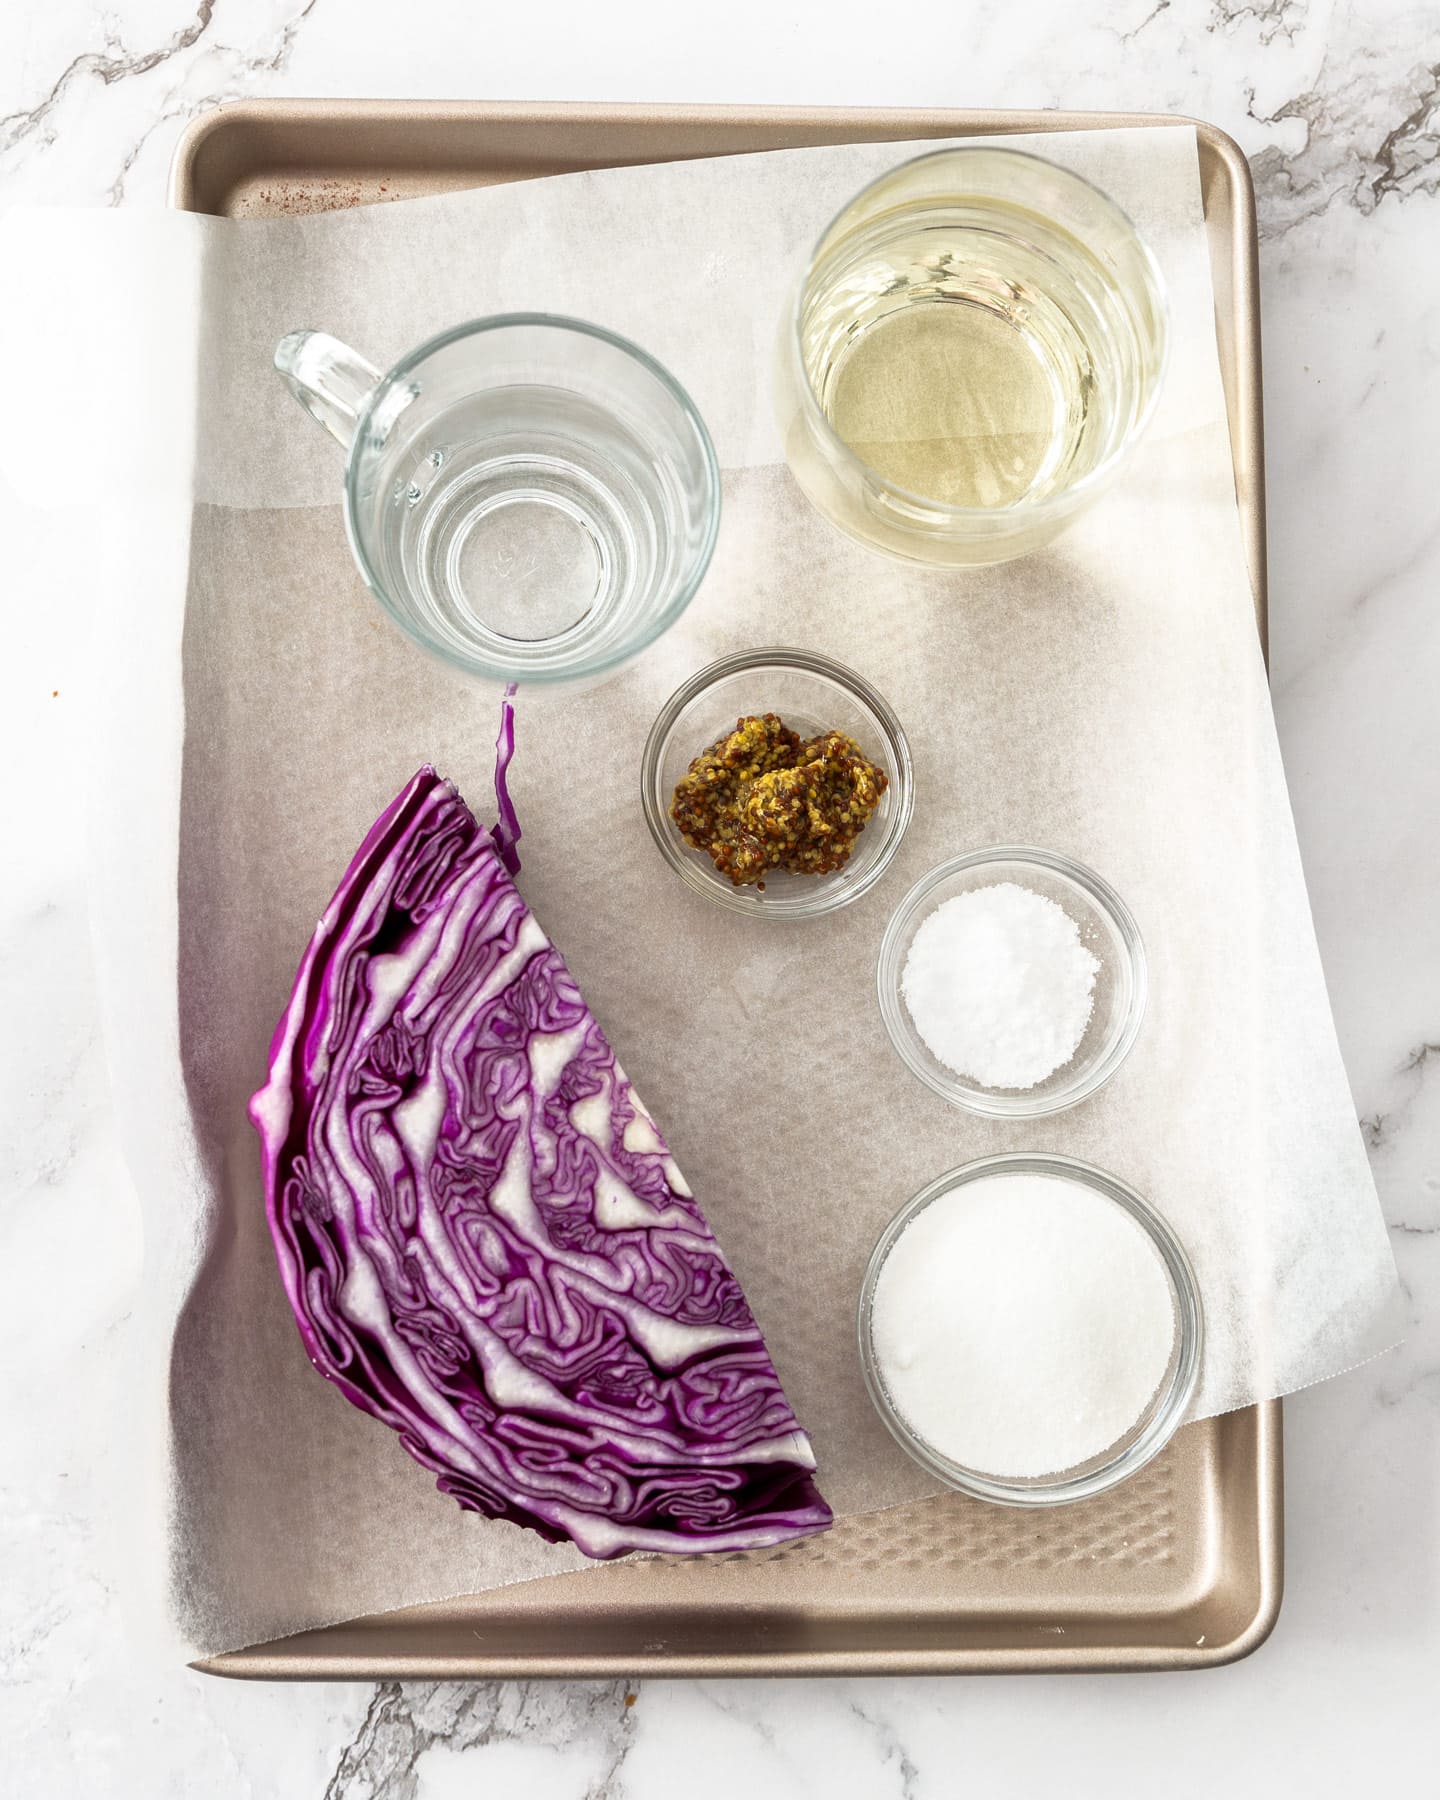 Ingredients for pickled red cabbage on a baking tray.